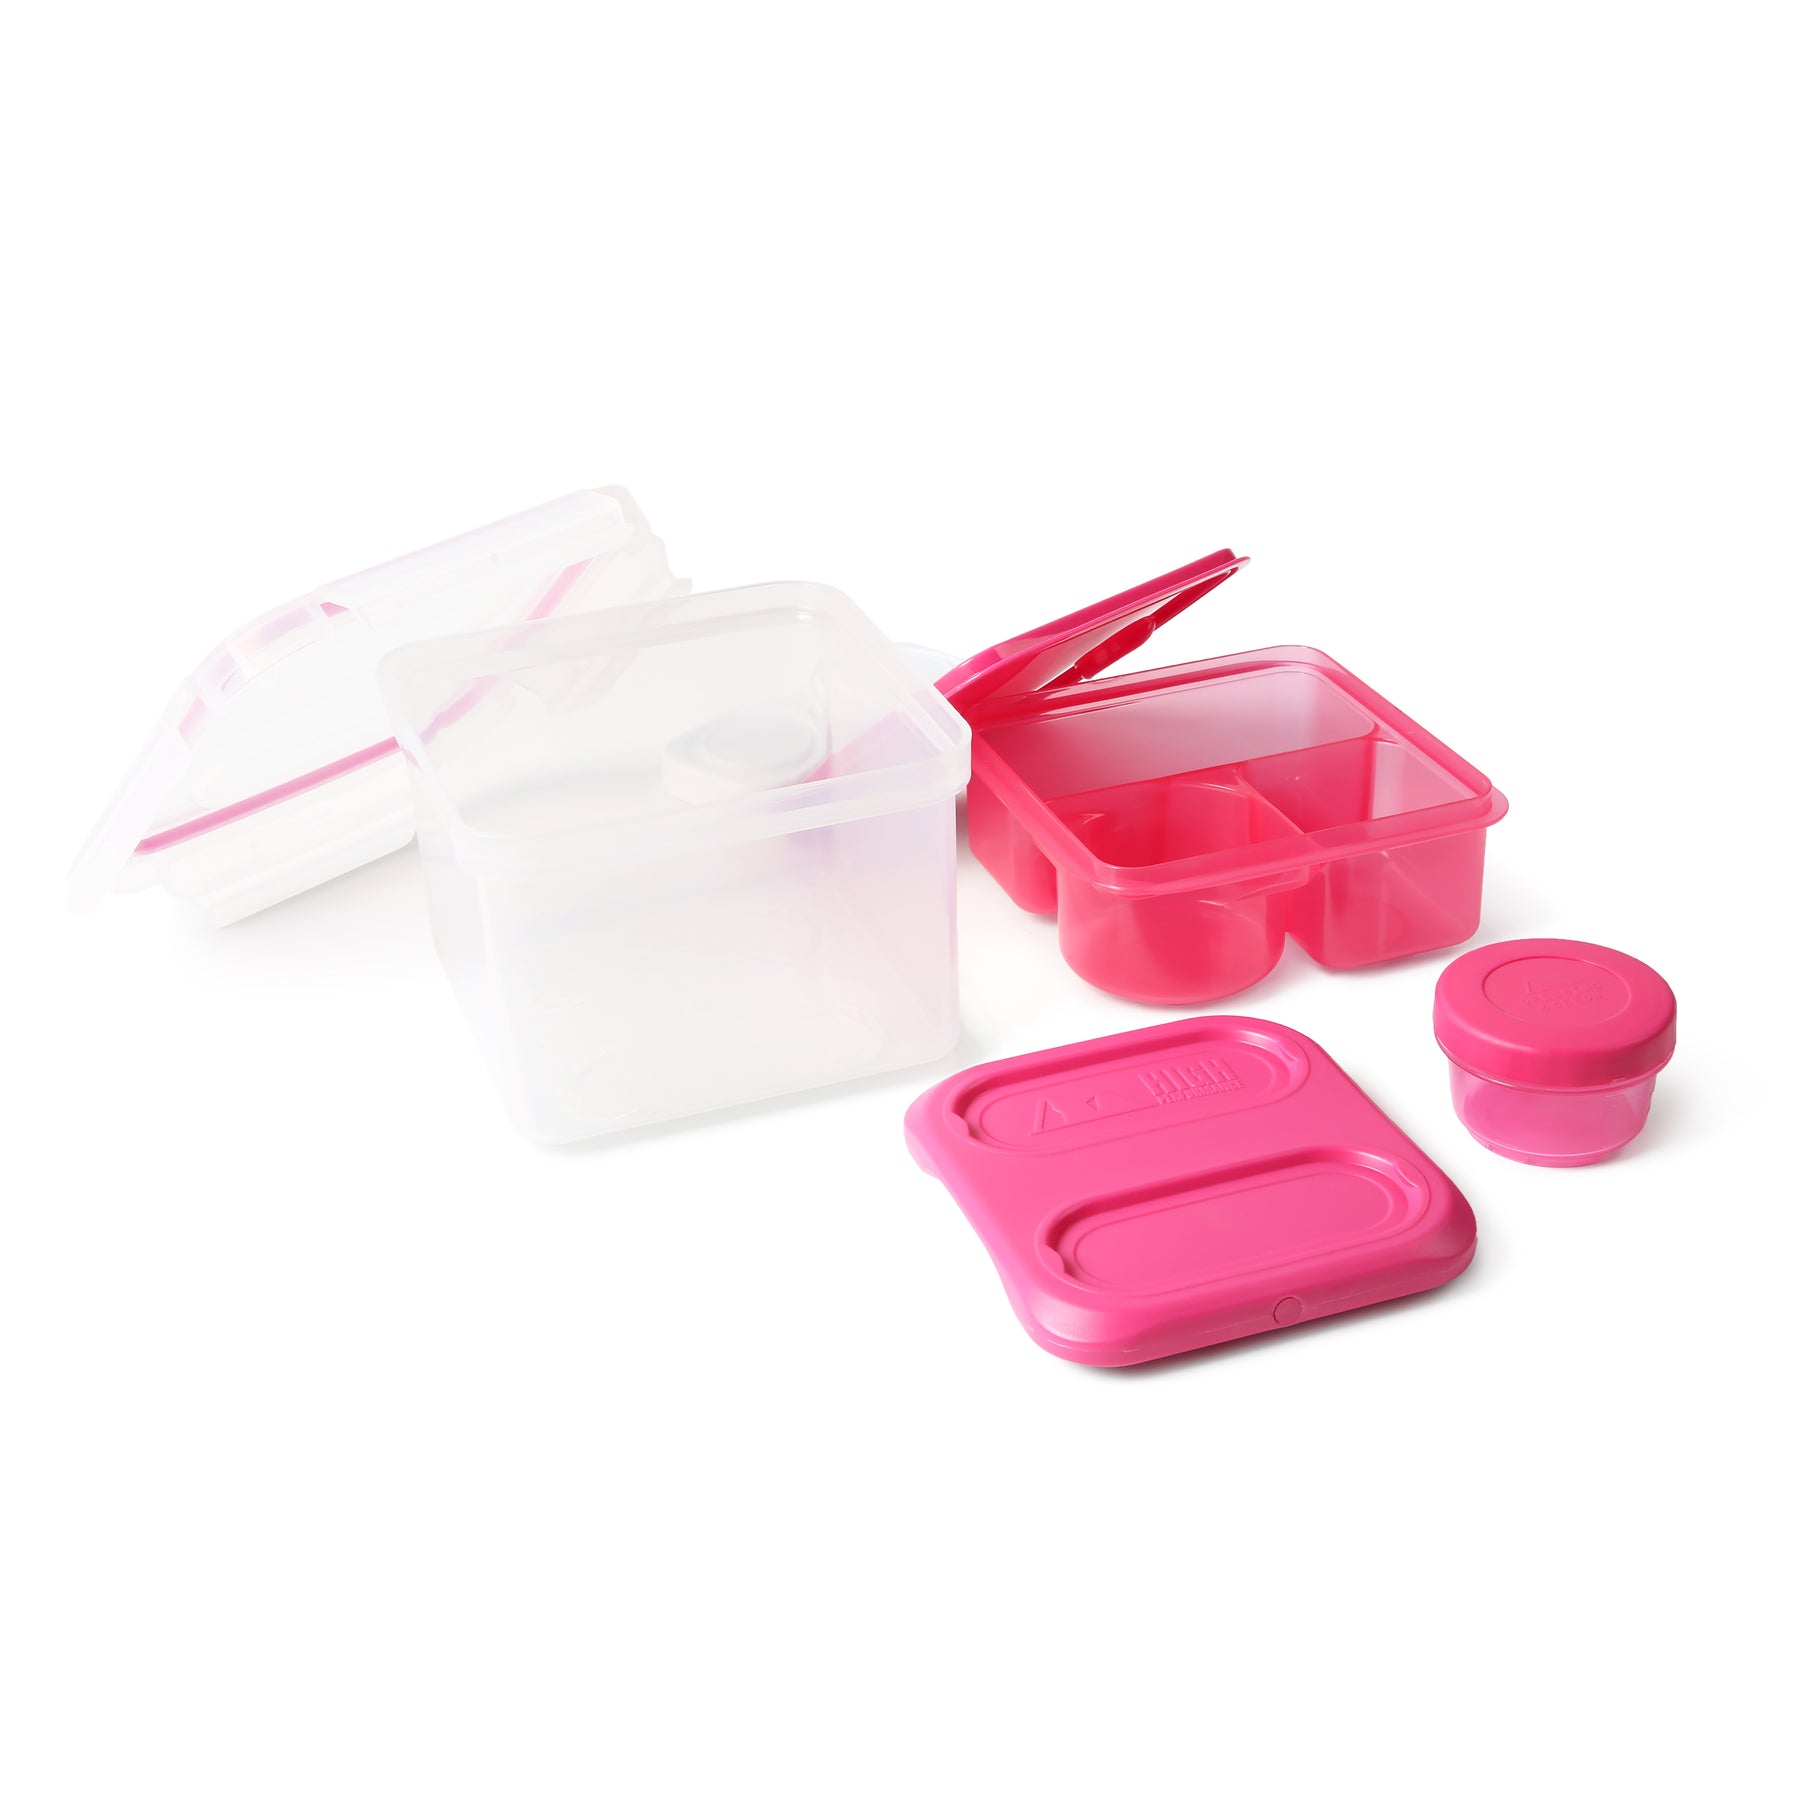 7 Piece All-in-One Deep Dish Meal Set Pink by Arctic Zone